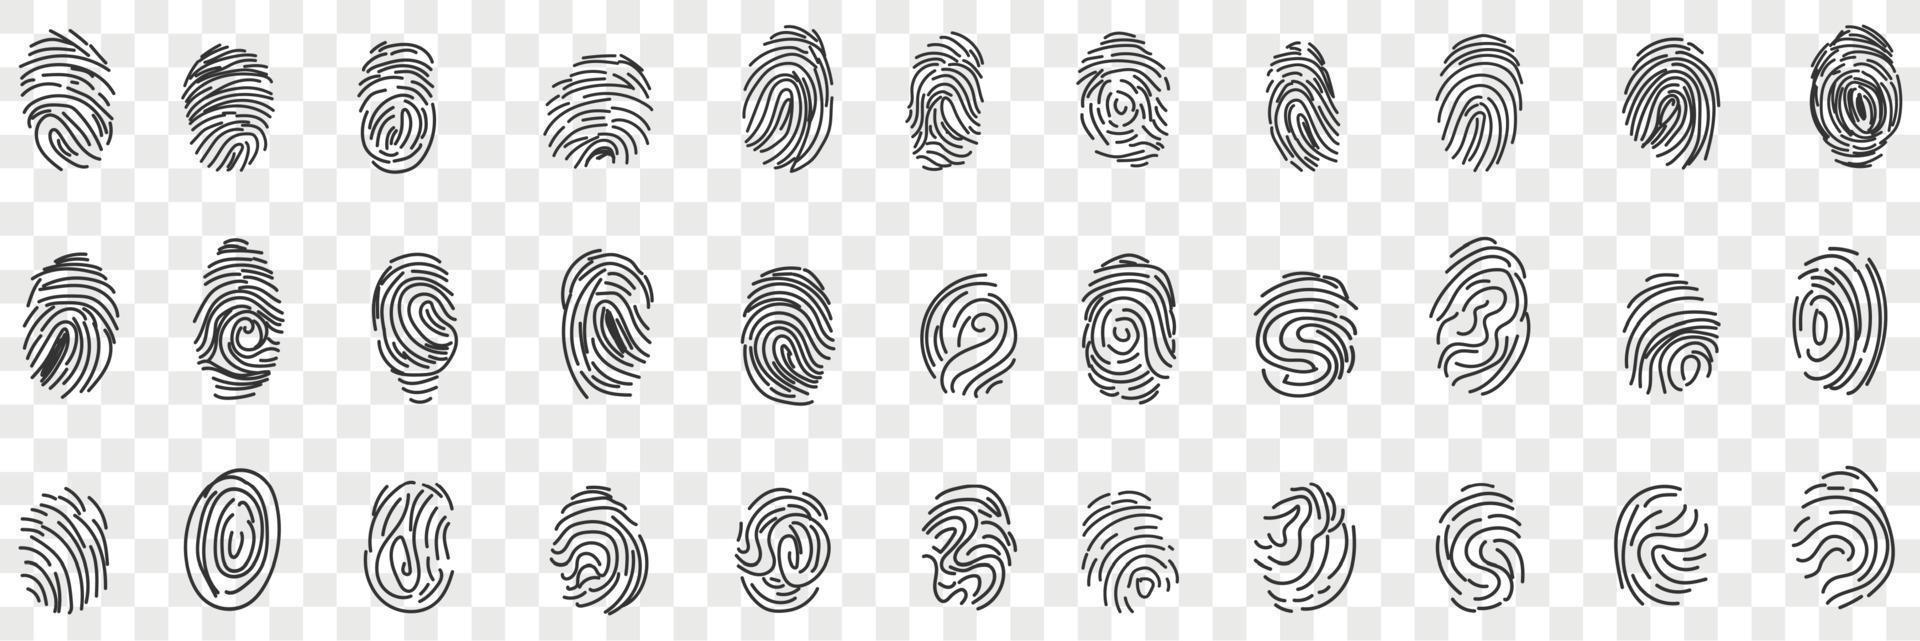 Fingerprints personal identity doodle set. Collection of hand drawn various human fingerprints for identifying person or passport identification or traveling isolated on transparent background vector